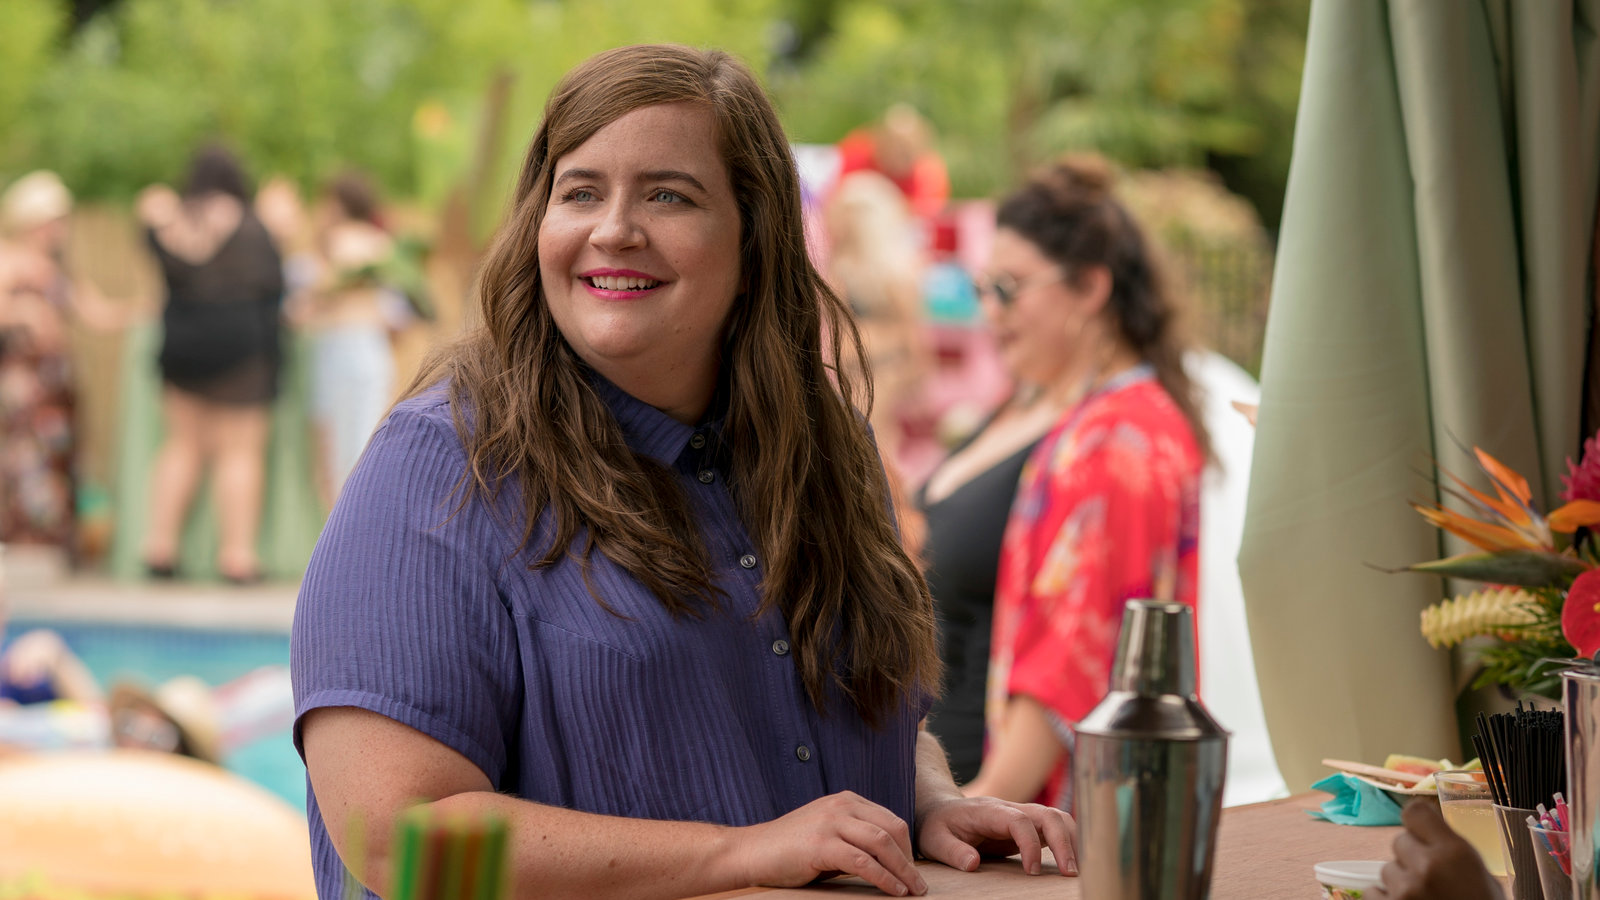 Where Did Shrill Filming Take Place?